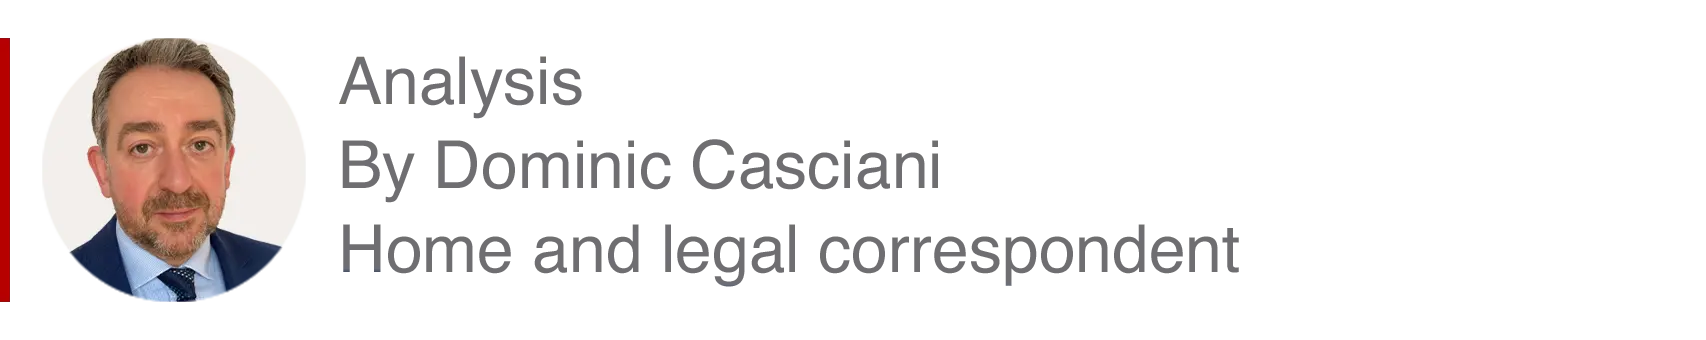 Analysis box by Dominic Casciani, home and legal correspondent